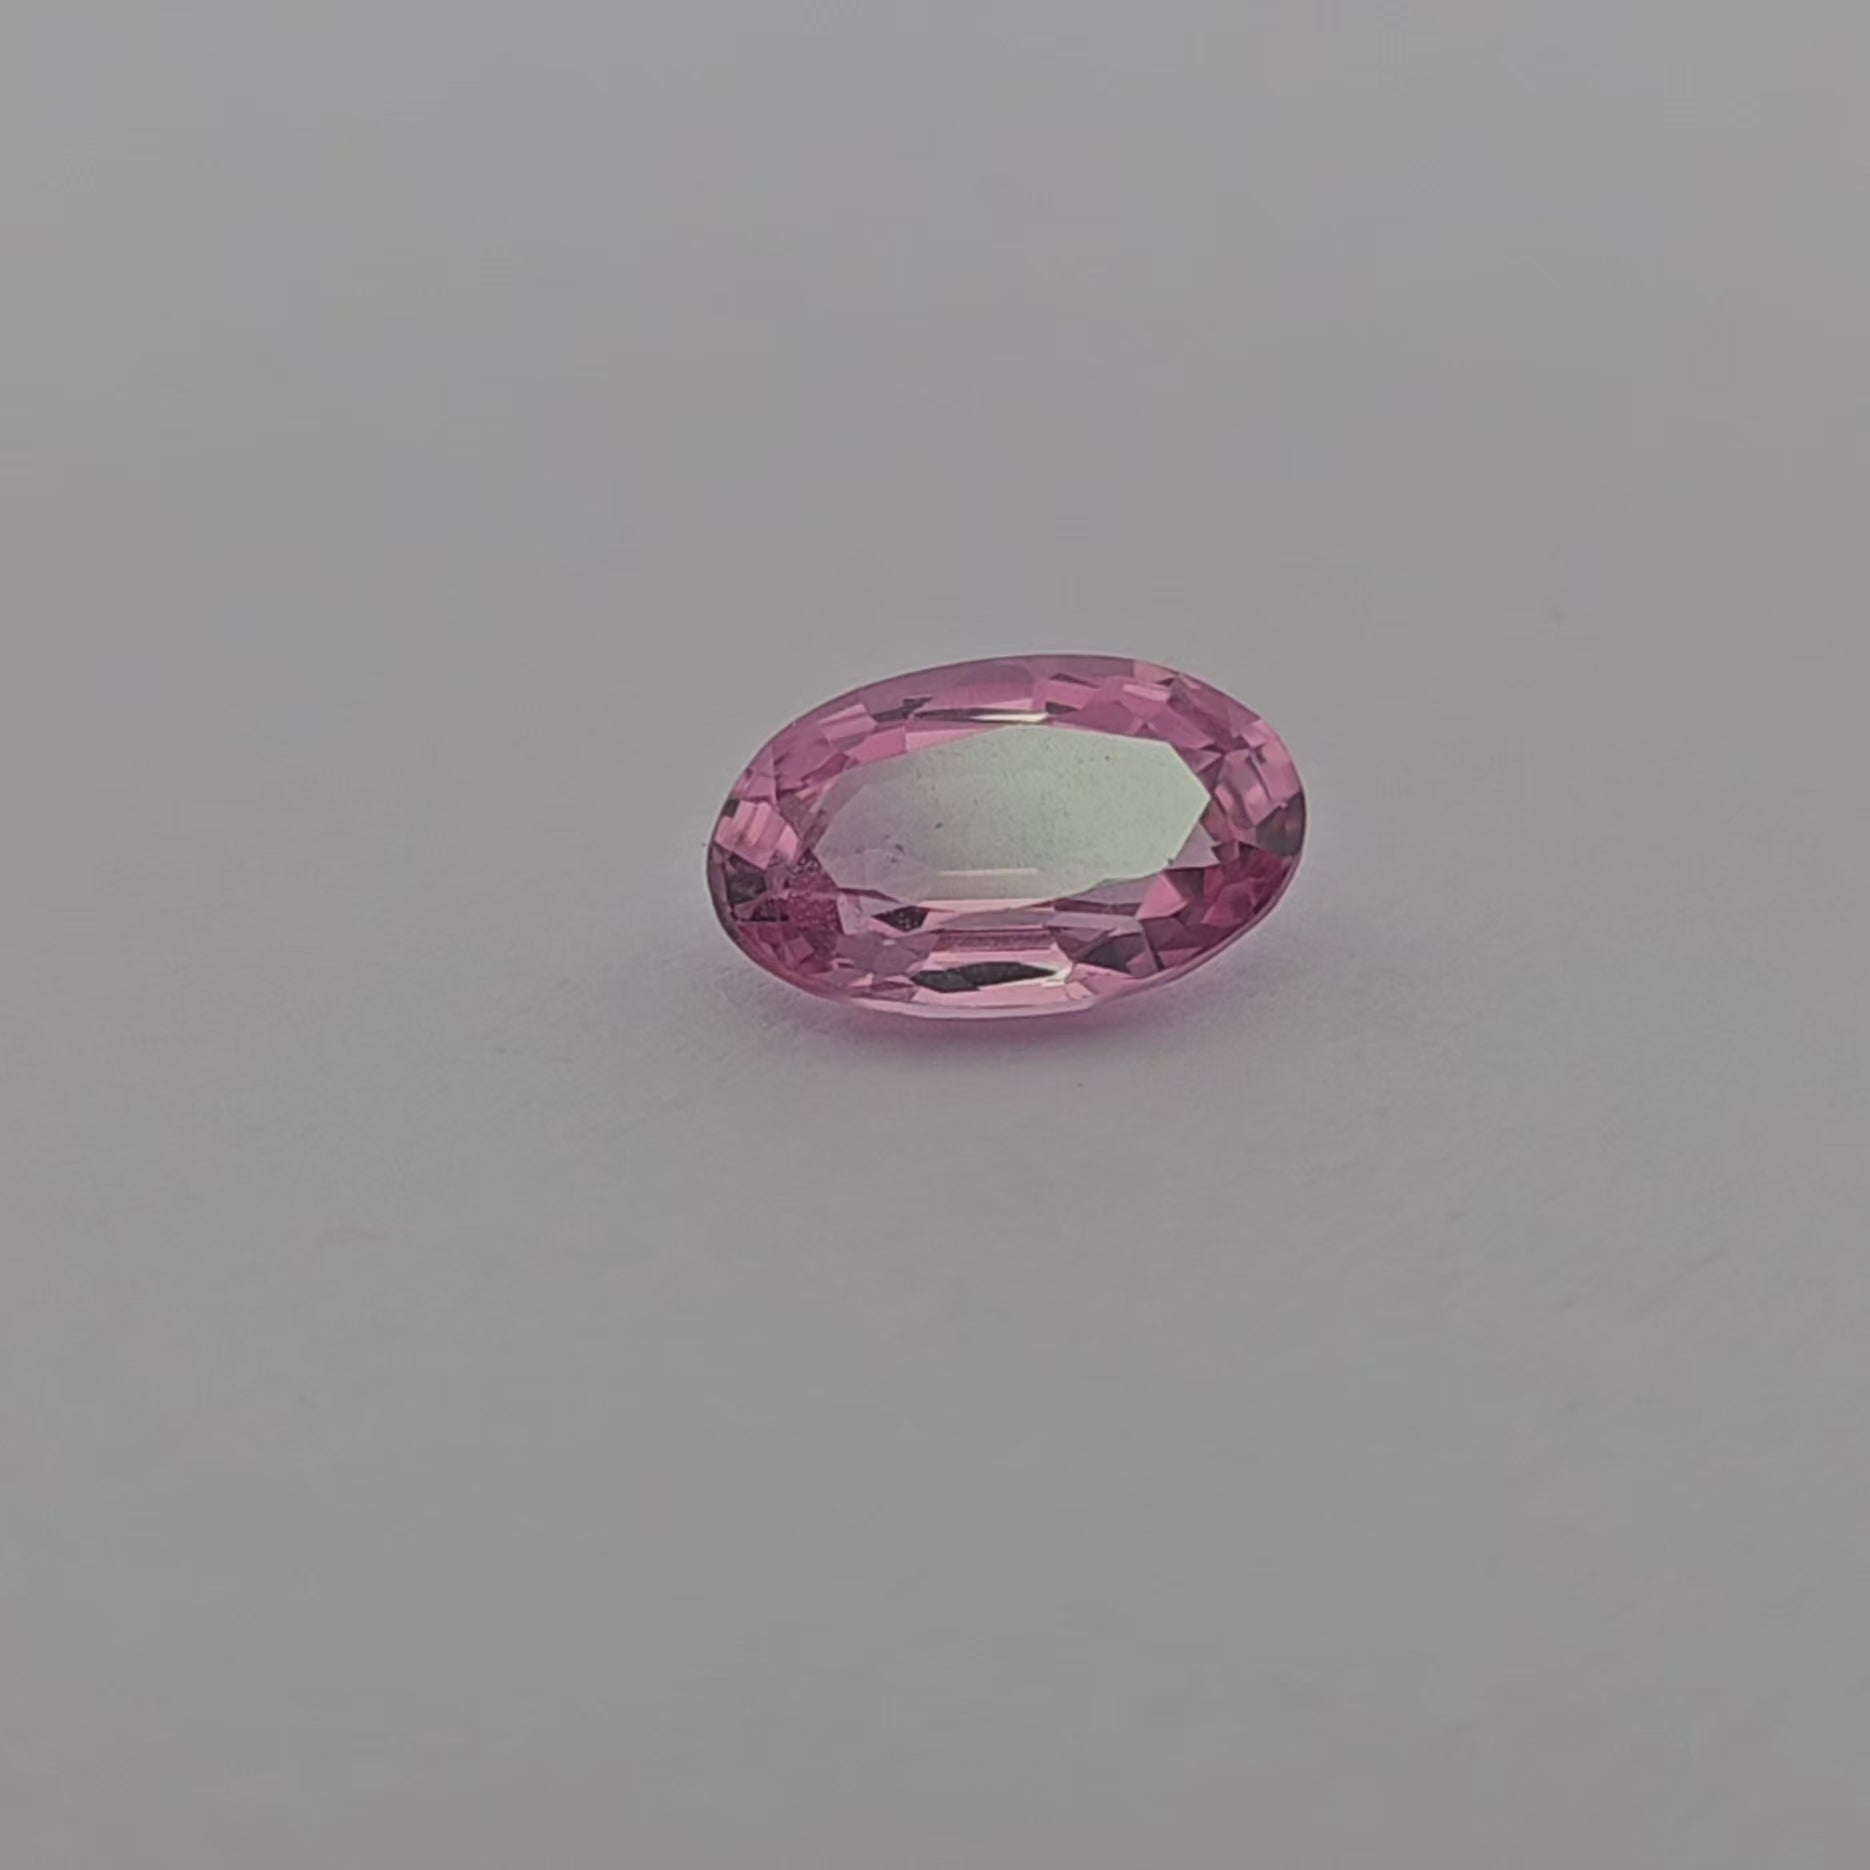 Natural Pink Spinel Stone 1.41 Carats Oval Cut (9x5.5 mm)